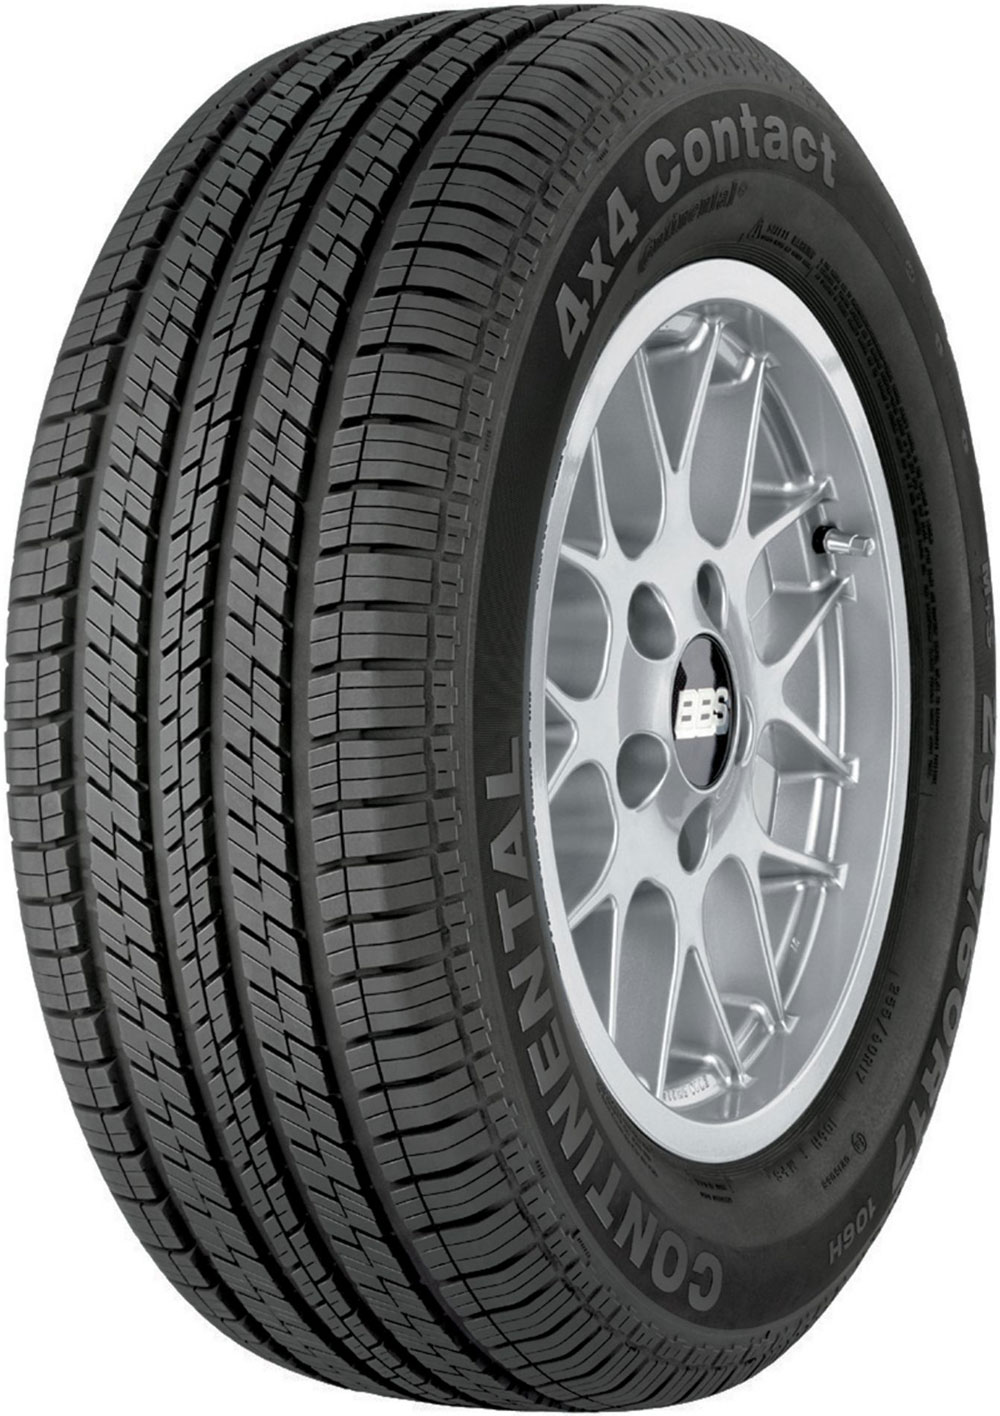 CONTINENTAL 4X4 CONTACT 225/65 R17 102T